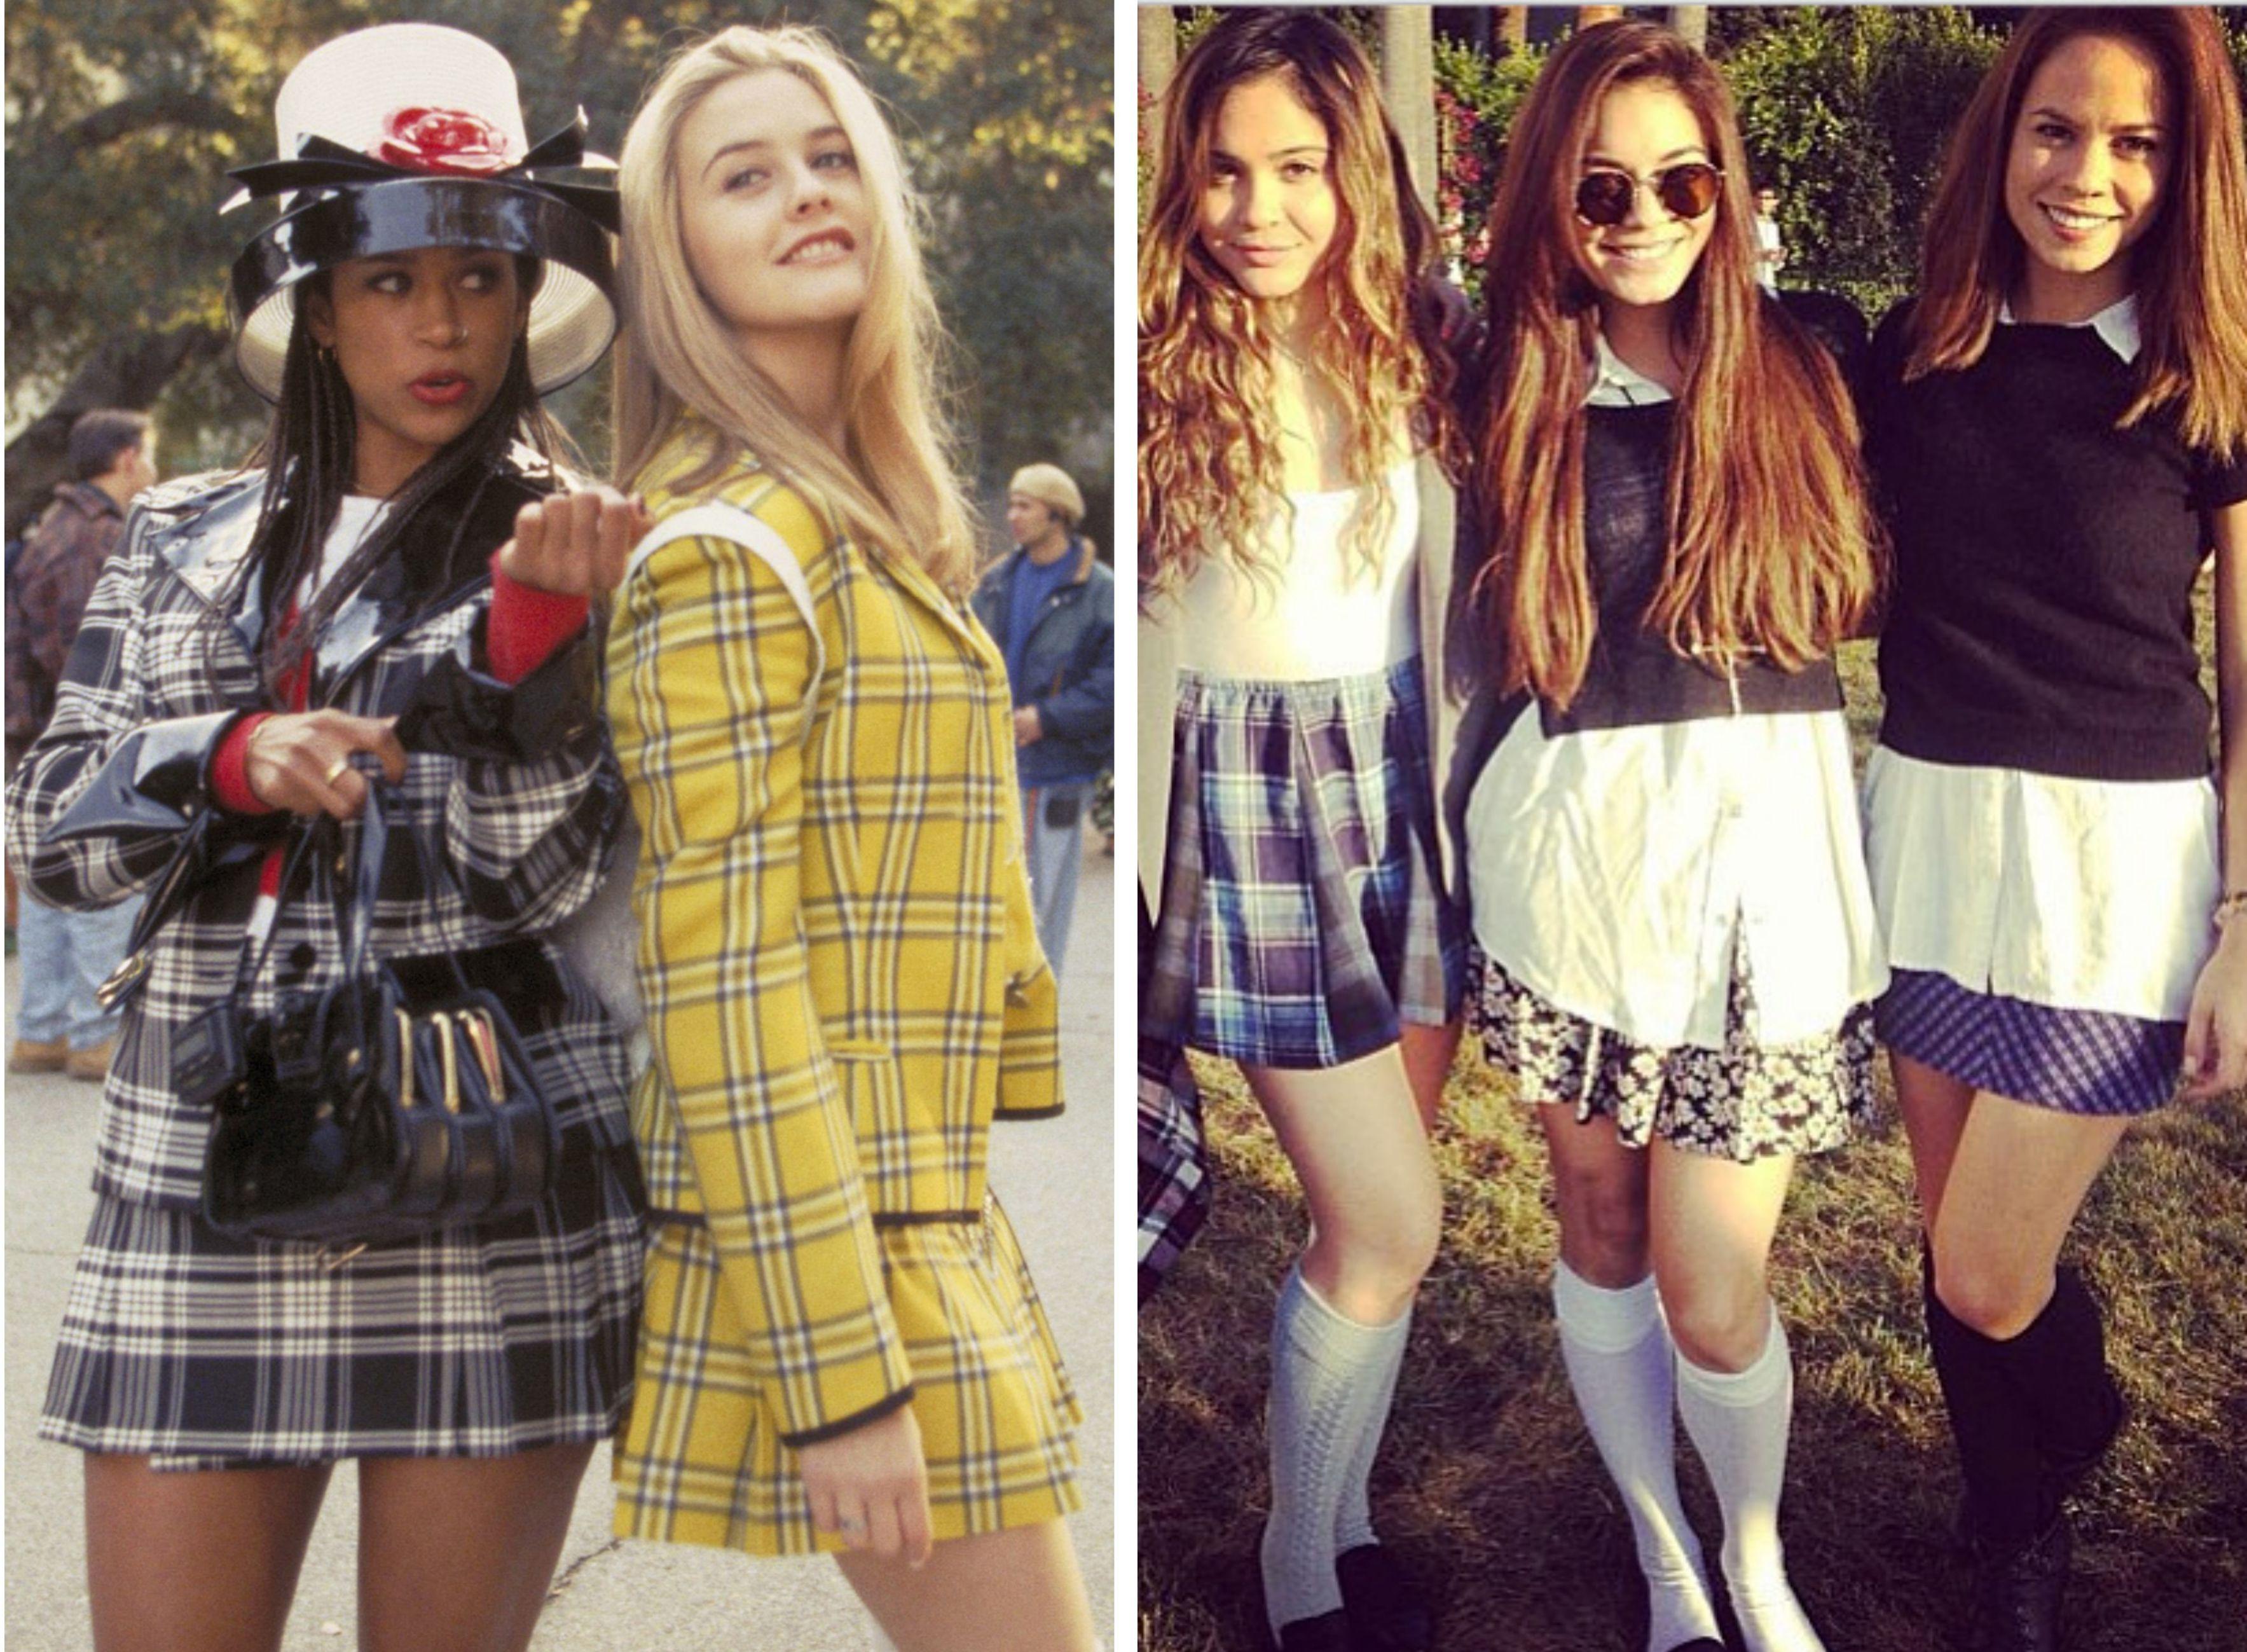 Print your Life: Katy Perry Shows Off Schoolgirl Style